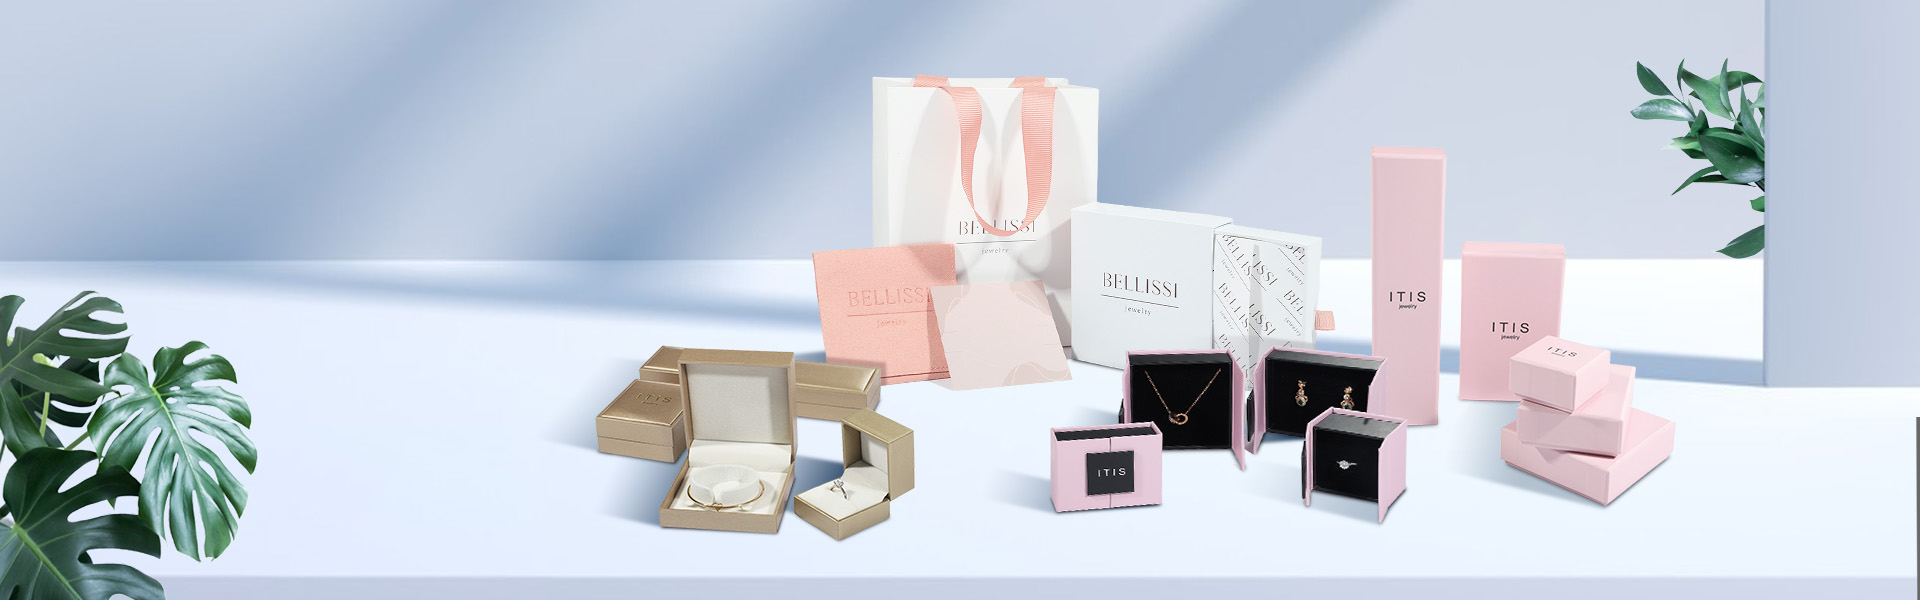 Custom jewelry packaging box - personalized packaging solutions by China Shenzhen ITIS Packaging Company